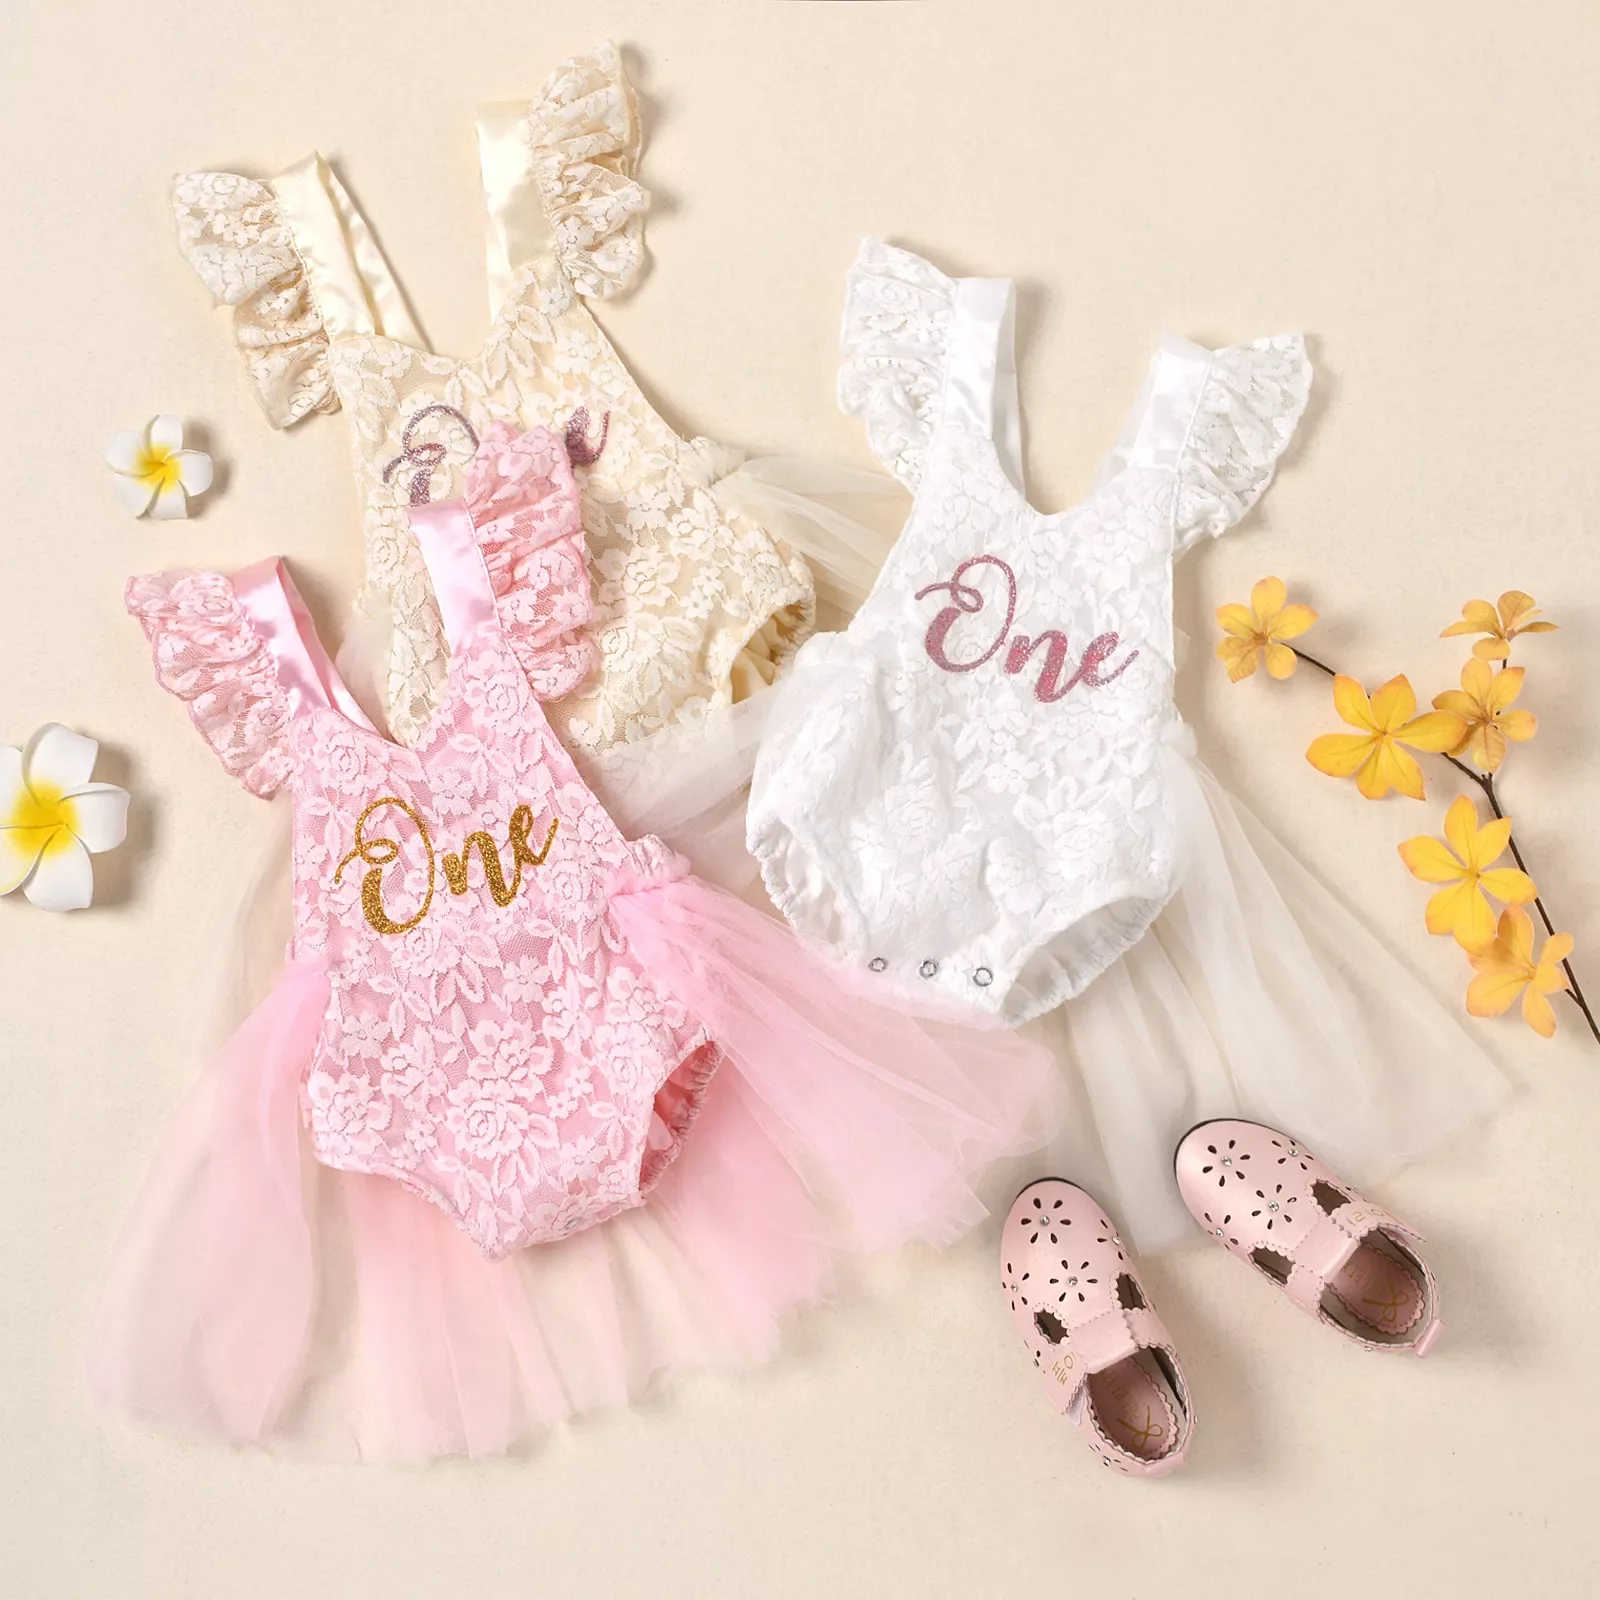 Baby Girls Birthday Romper Dress with Mesh Stitching, One Letter Print Florals Lace Jumpsuits Princess Summer Costume